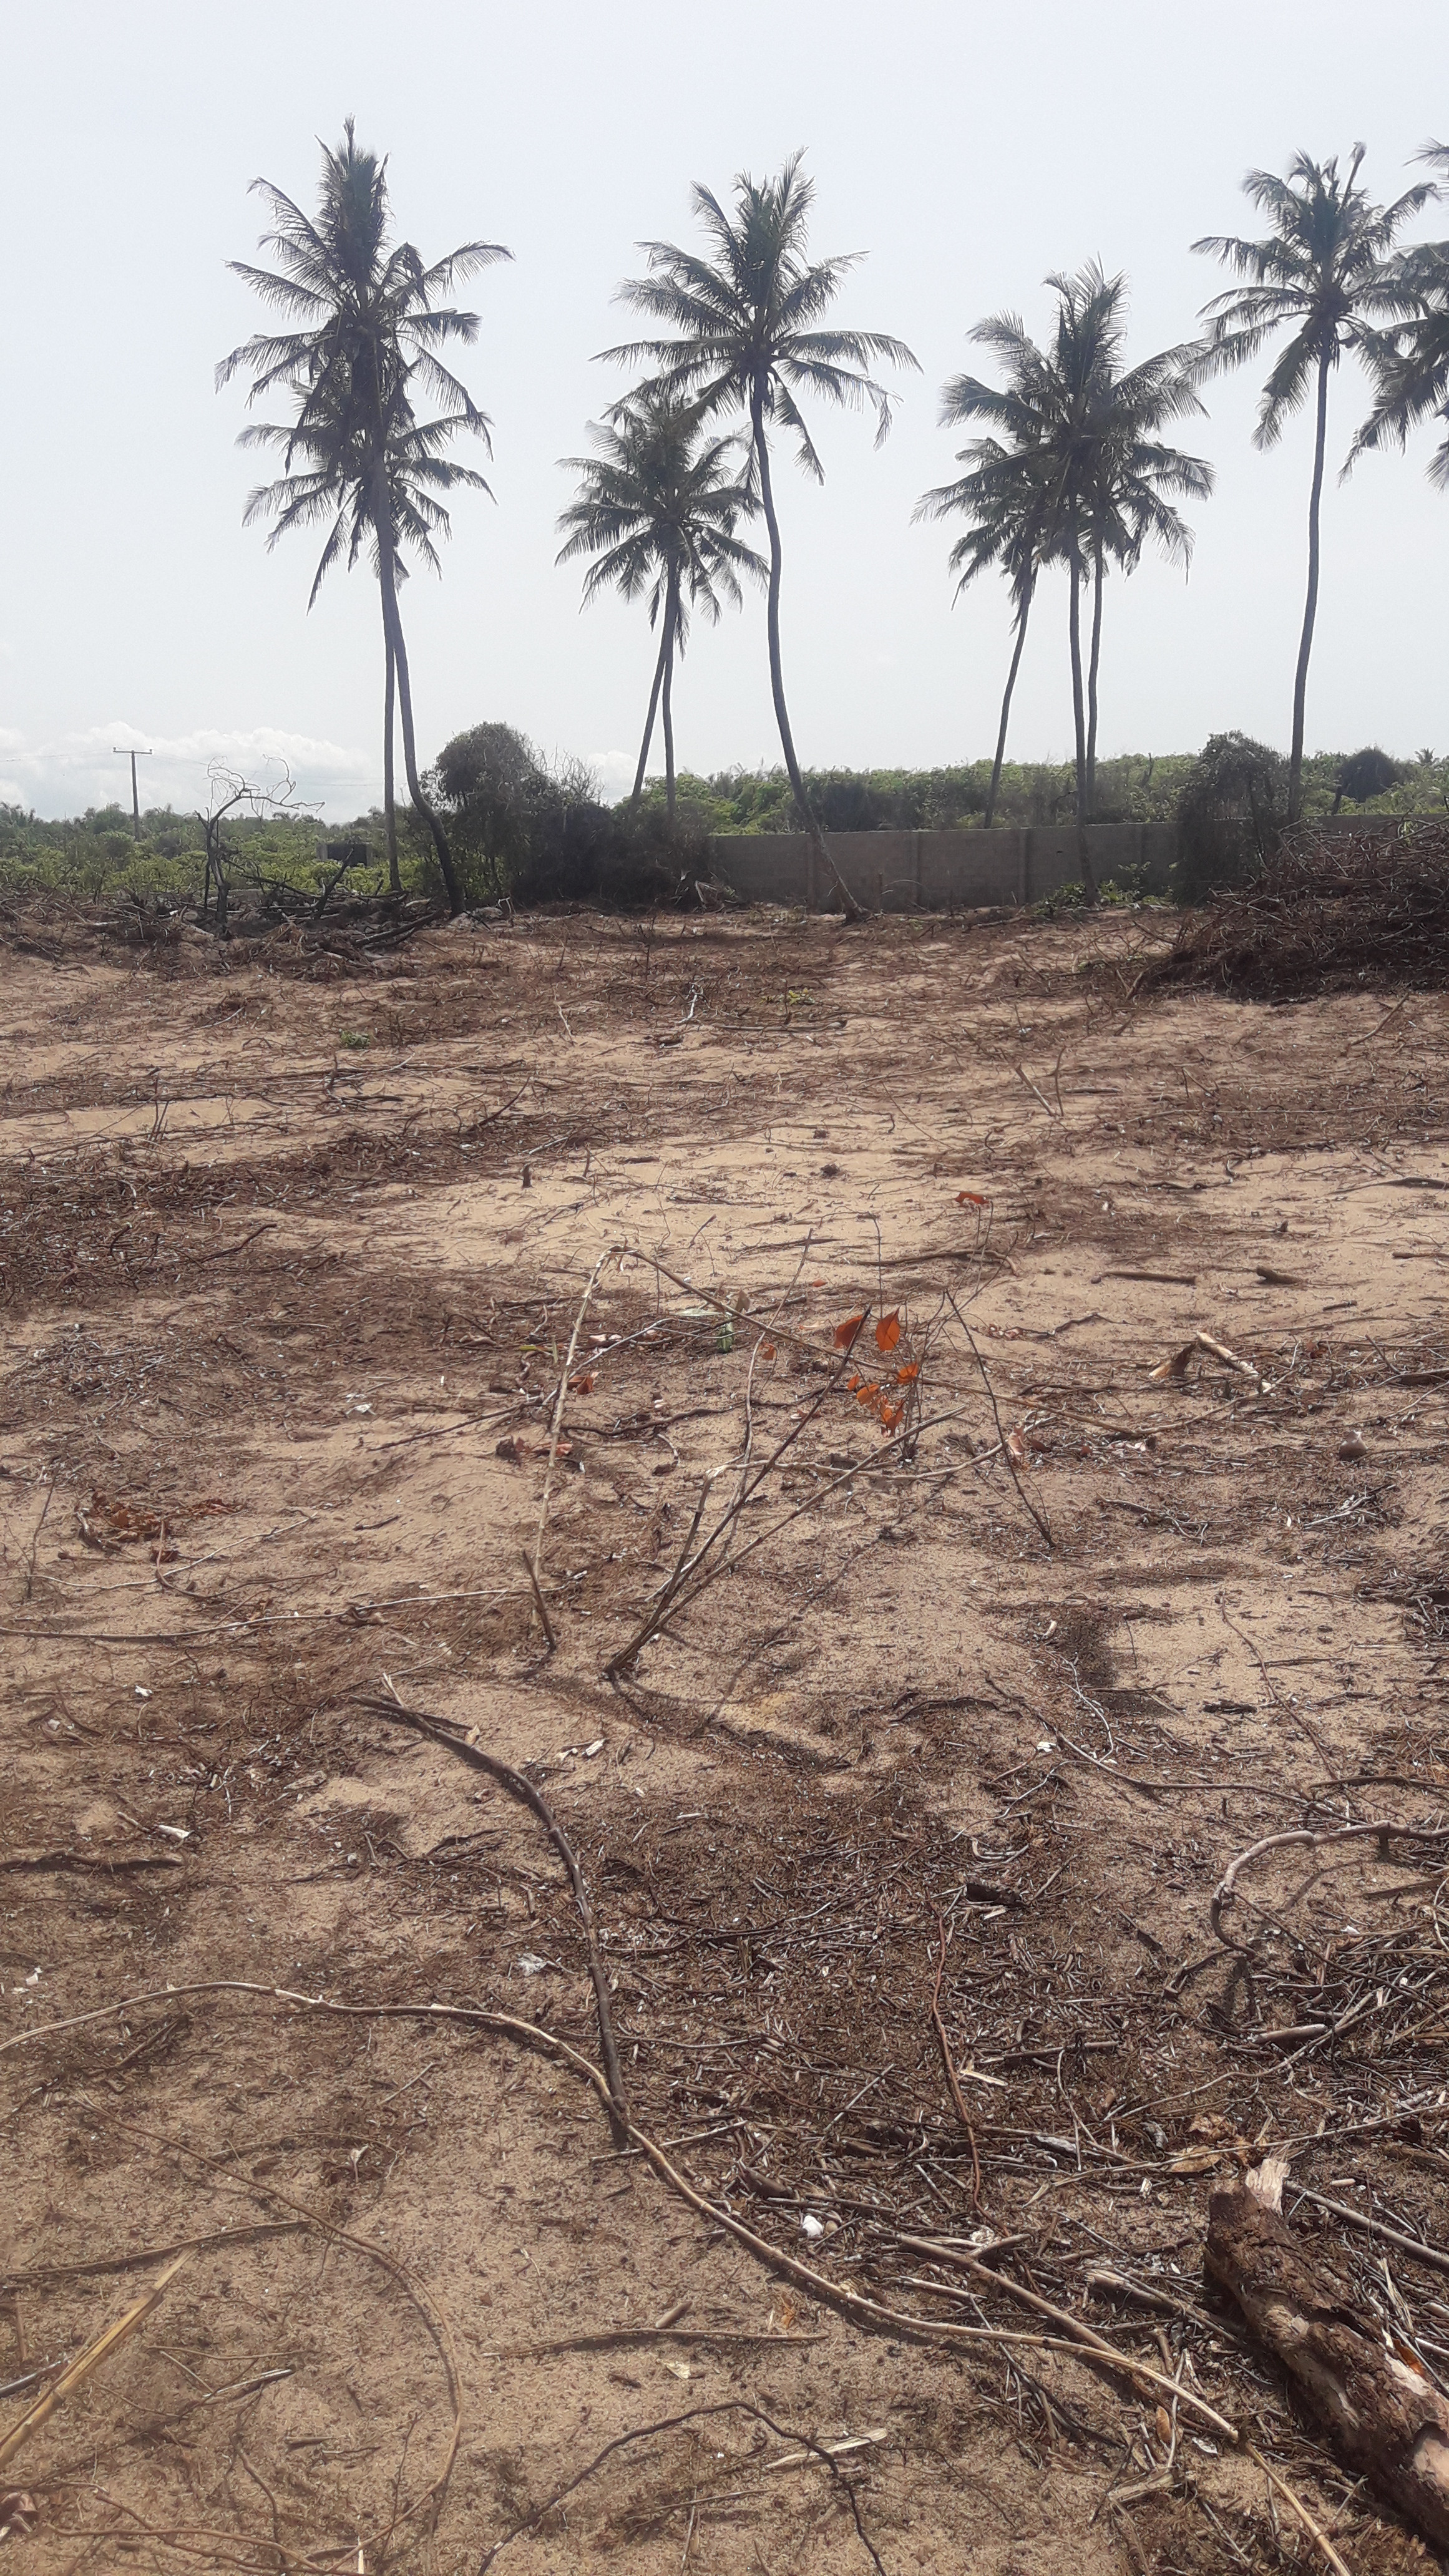 Land with Governor's  consent for sale in Vopnu City Ocean View Estate.